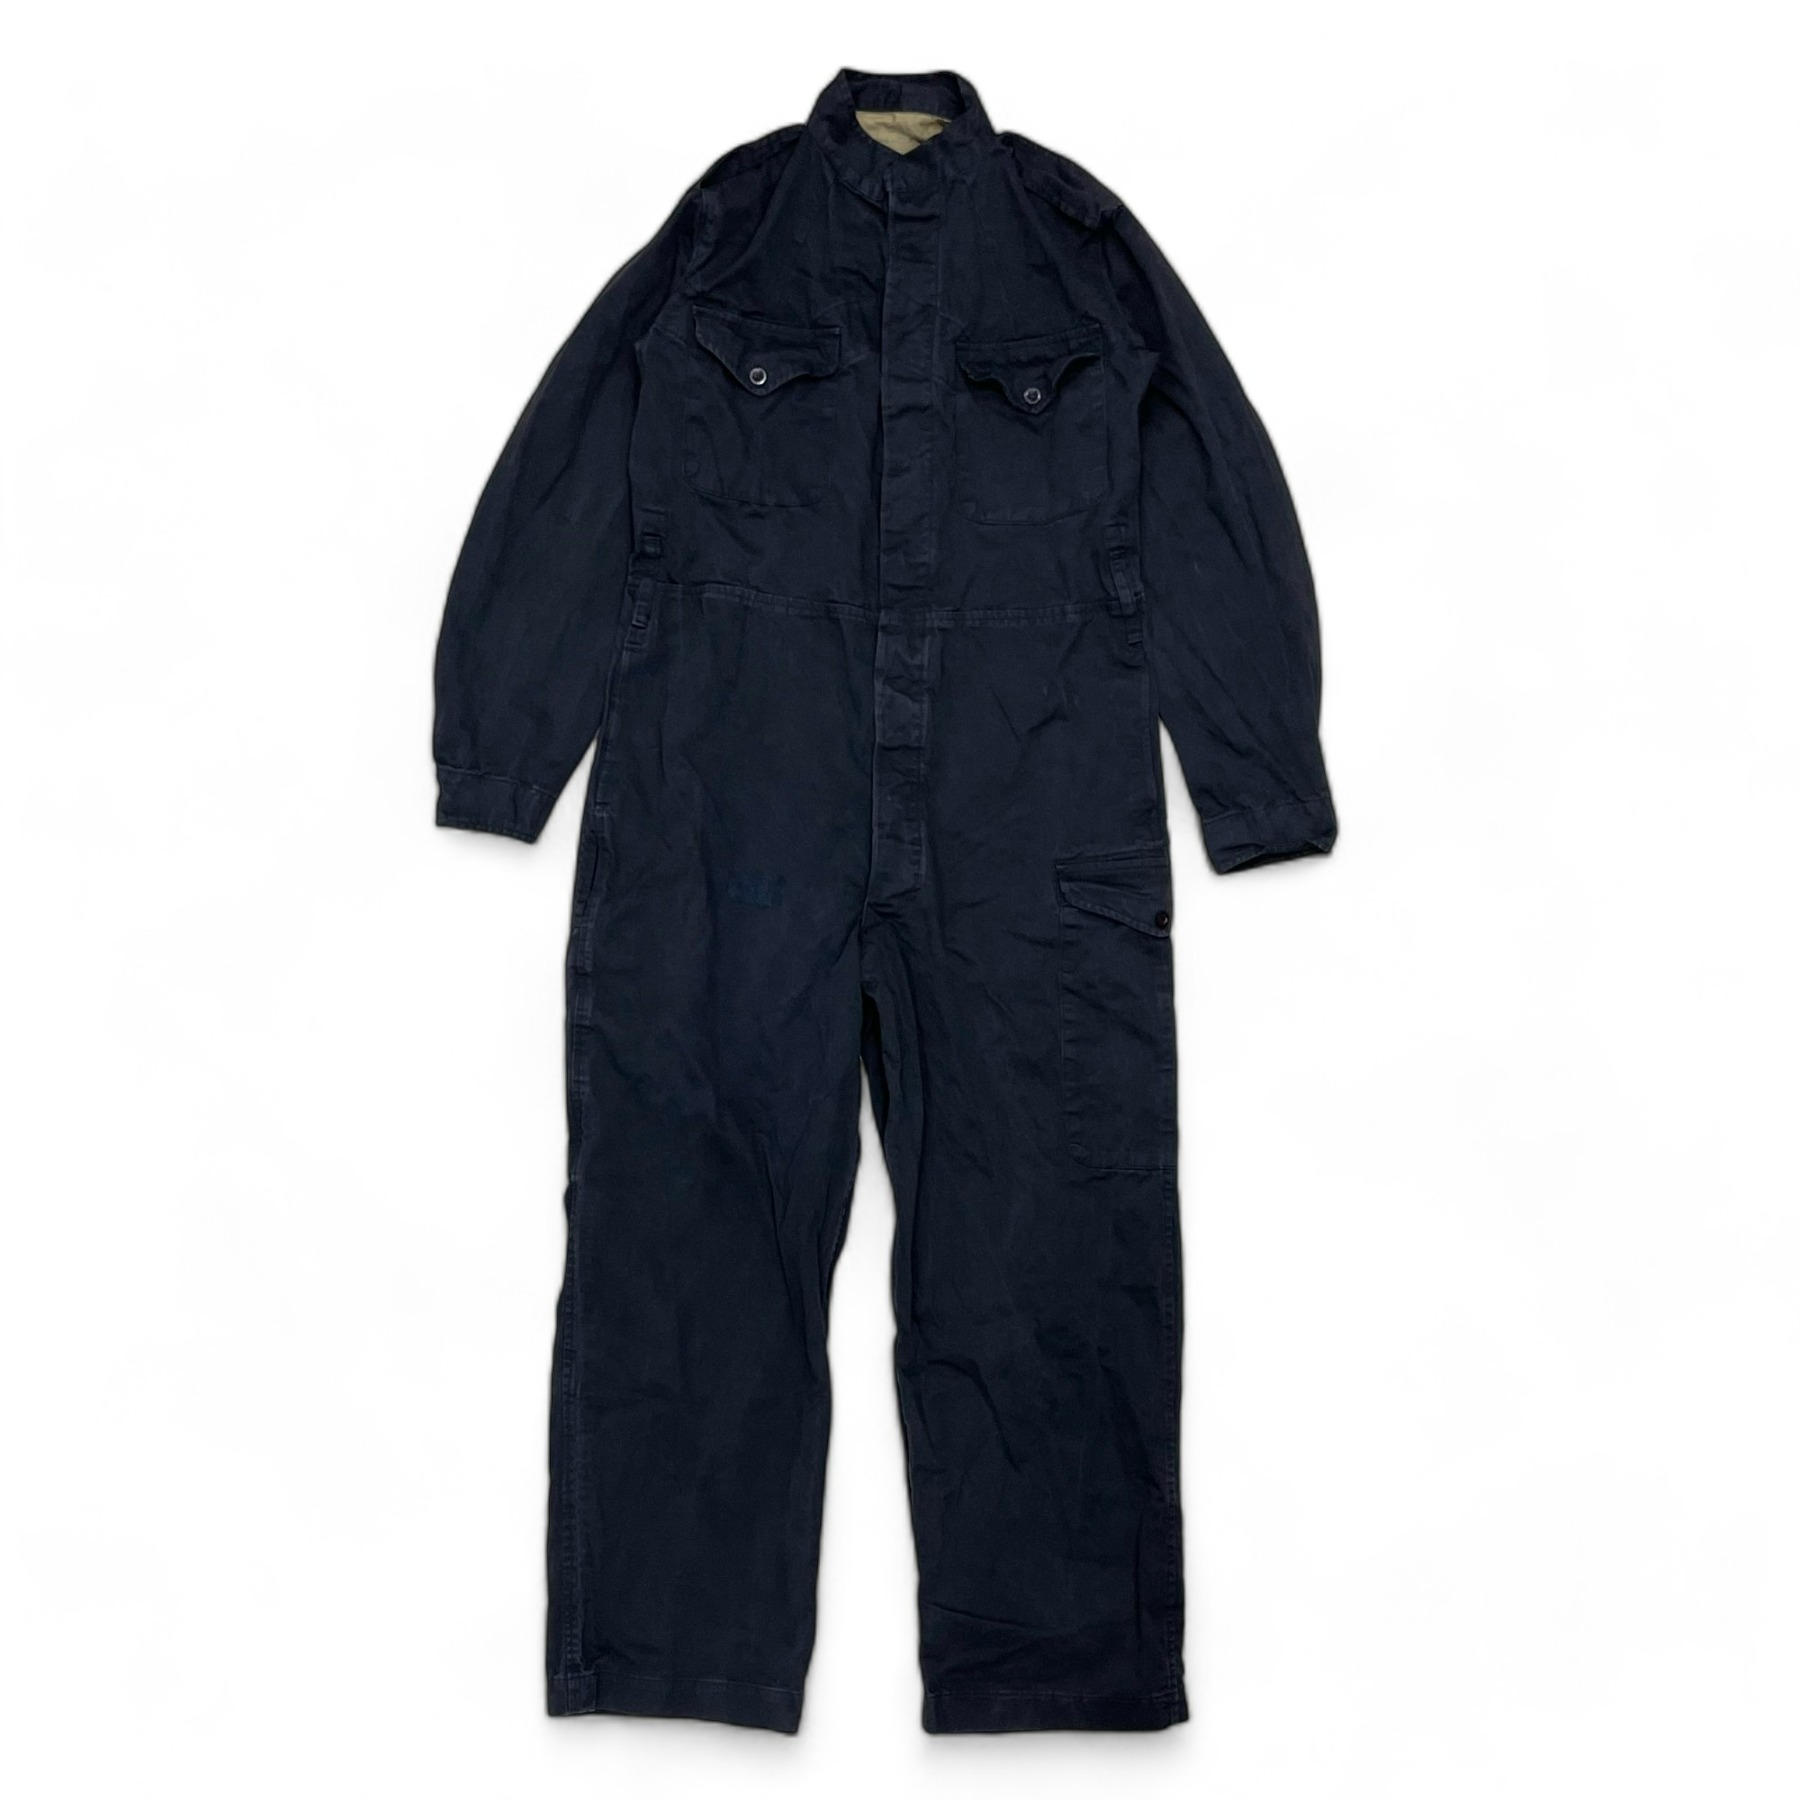 Vintage Coverall - 100